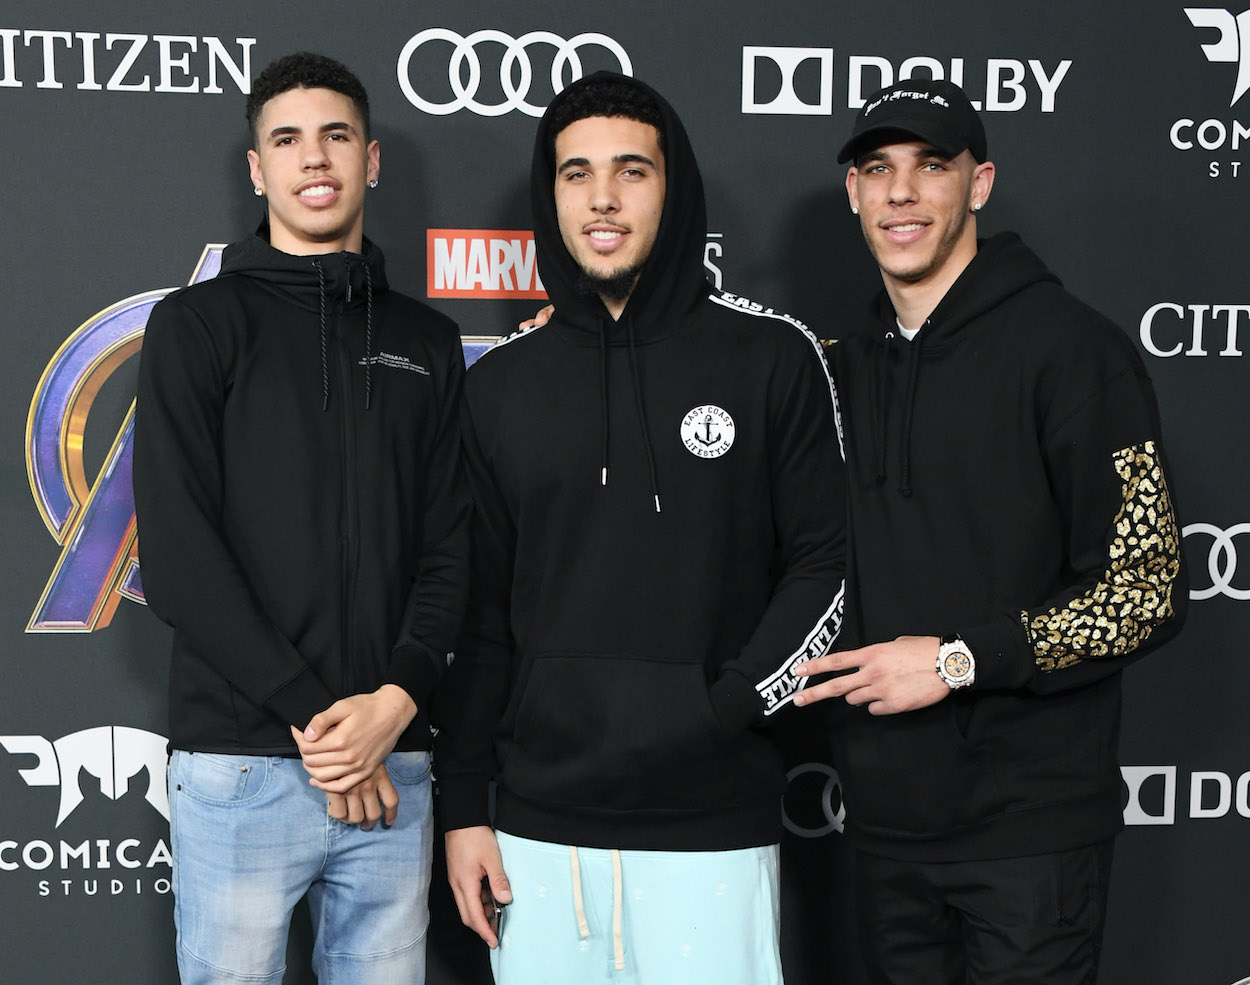 LaMelo Ball, LiAngelo Ball and Lonzo Ball attend the World Premiere Of Walt Disney Studios Motion Pictures "Avengers: Endgame" at Los Angeles Convention Center on April 22, 2019 in Los Angeles, California.